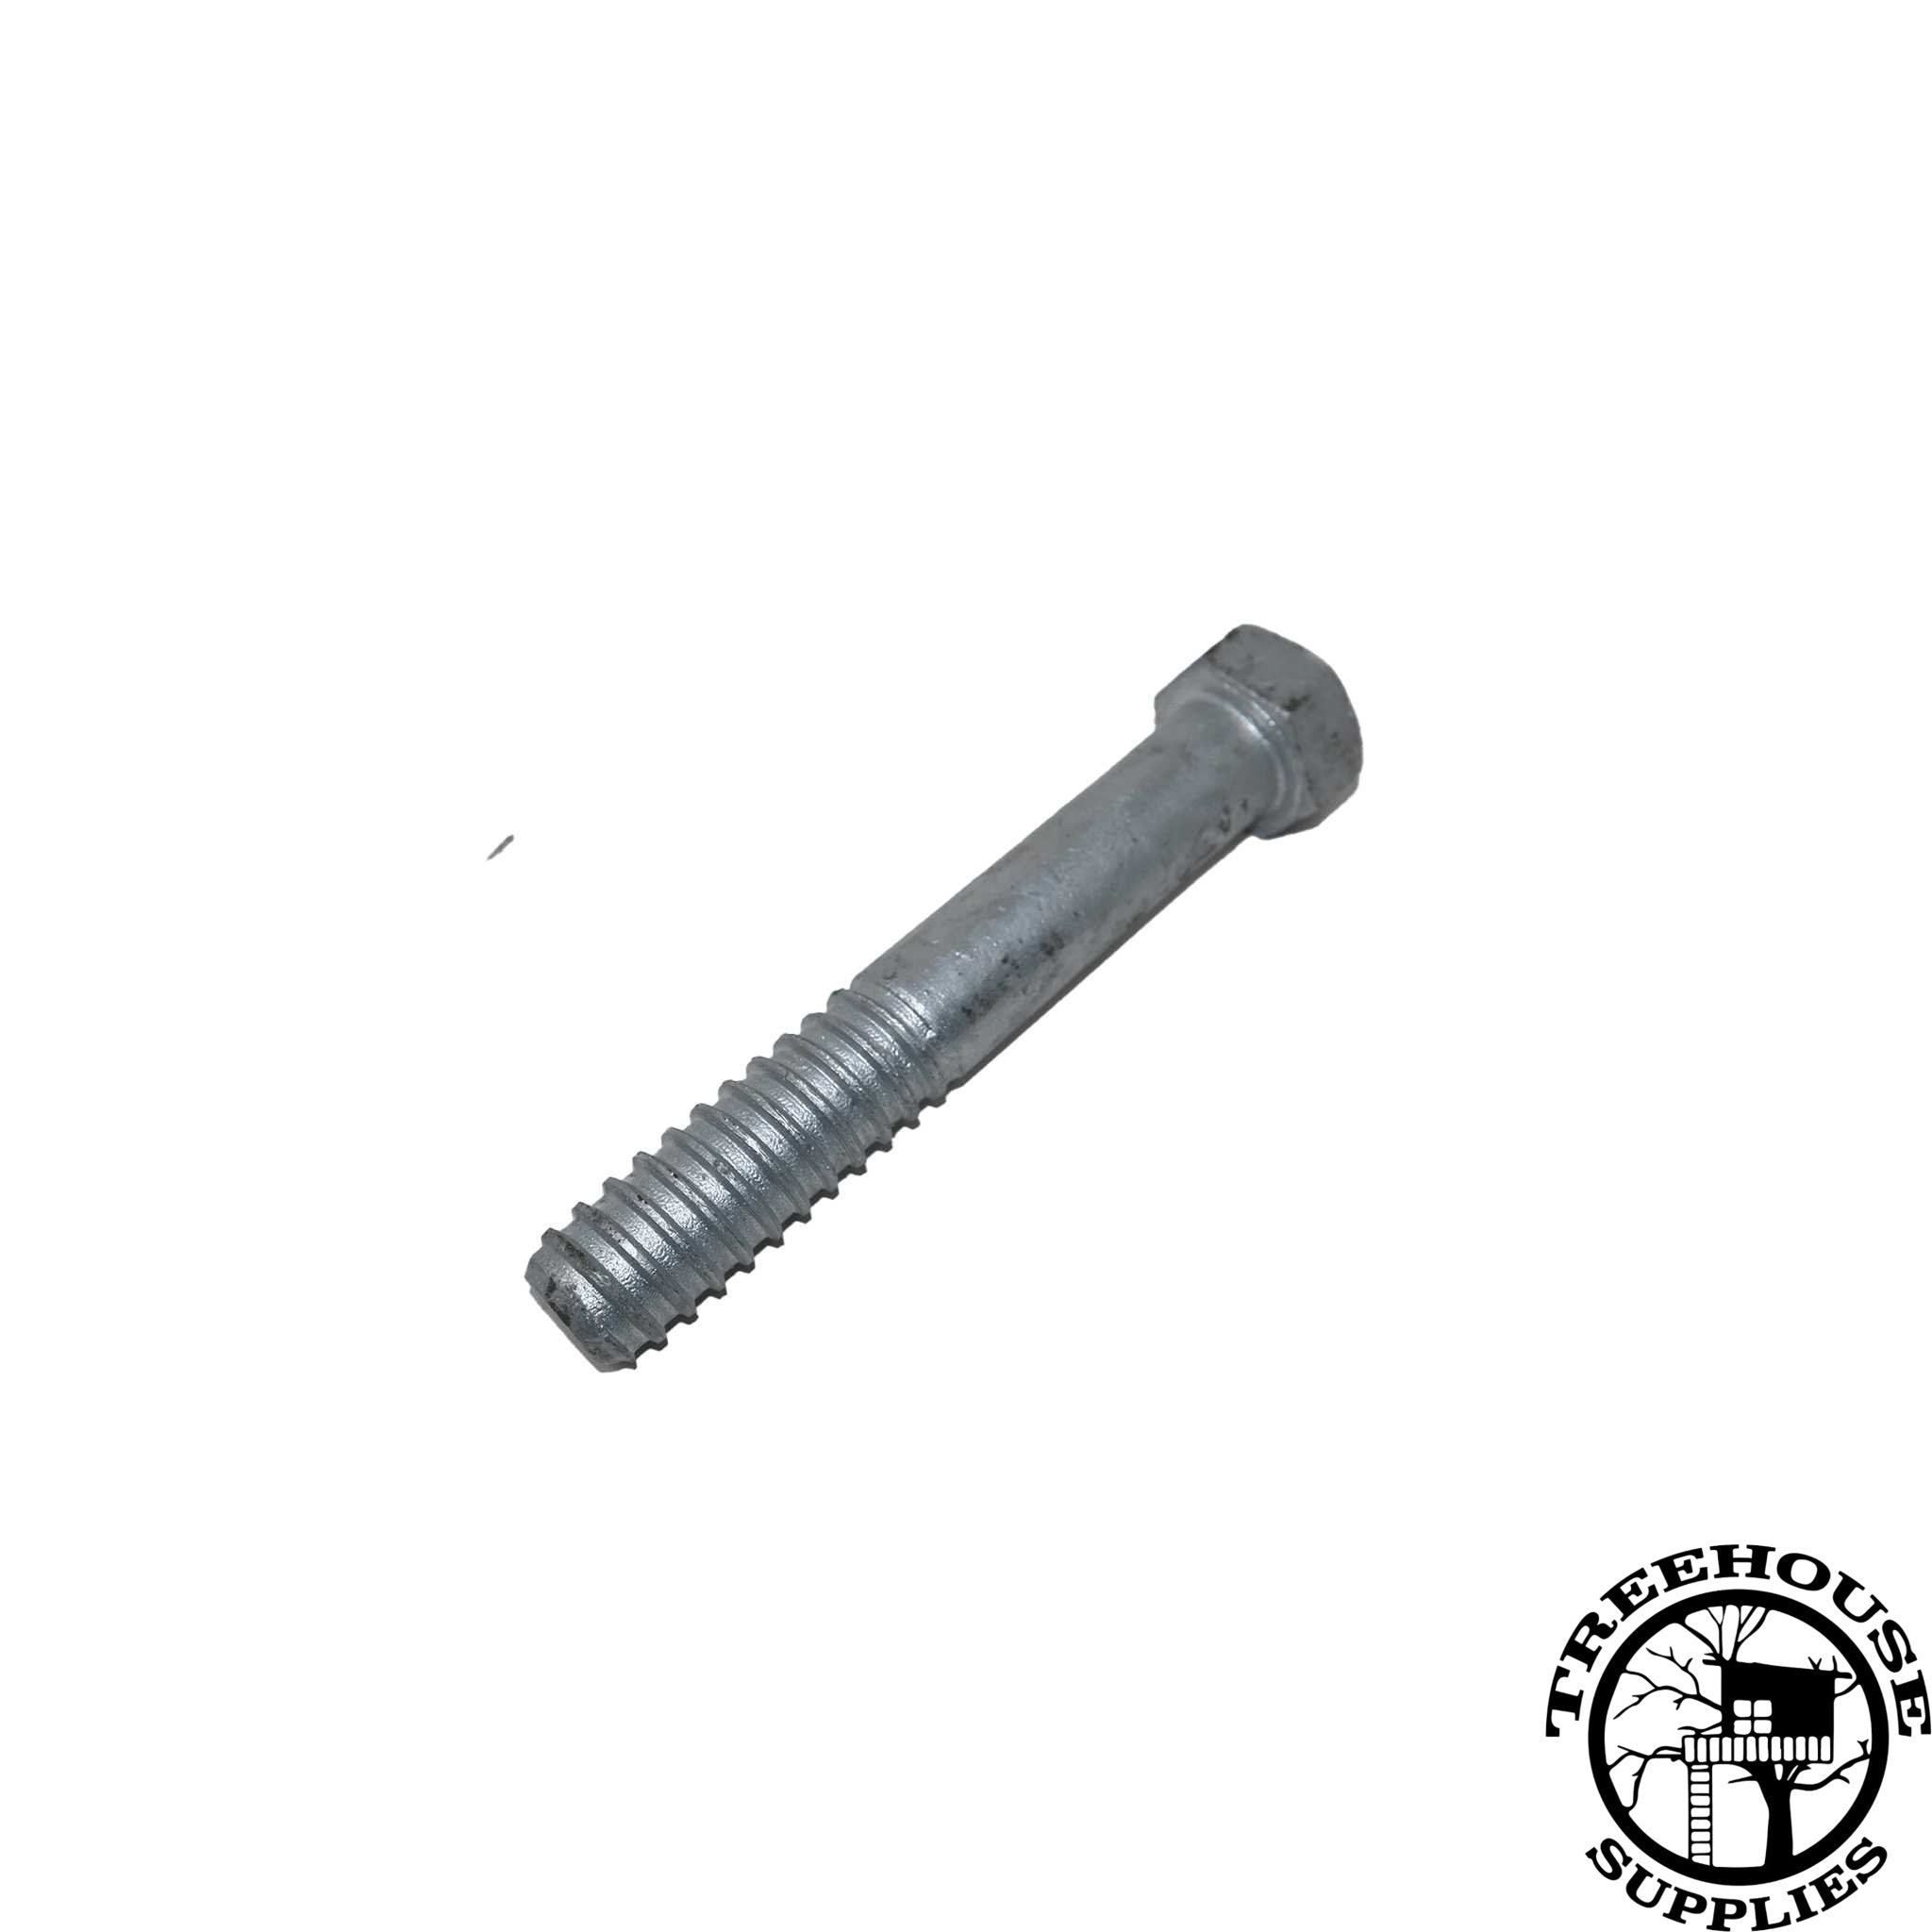 This 1.25'x8' lag bolt is a lightweight treehouse fastener for situations where a Treehouse Attachment Bolt is not necessary.